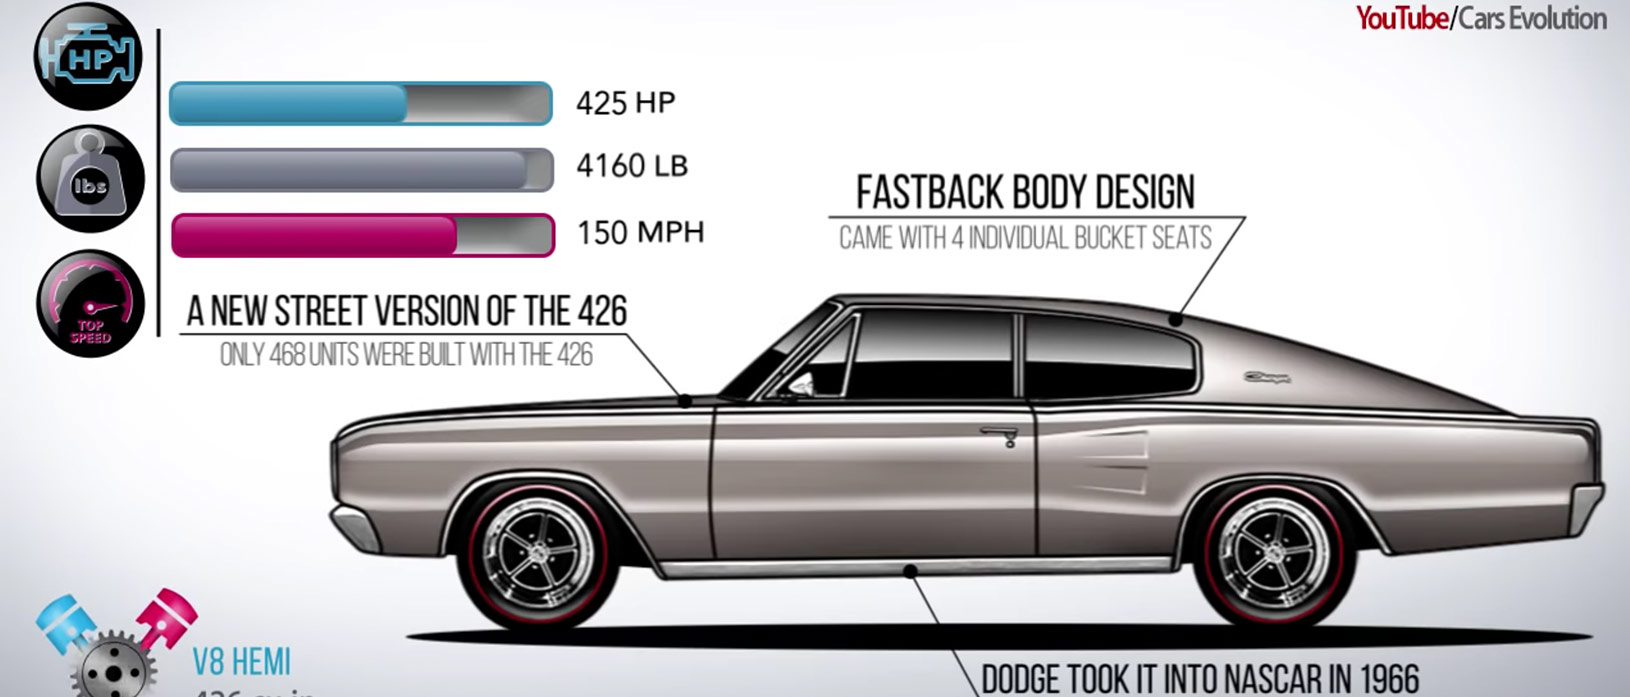 Evolution of the Dodge Charger